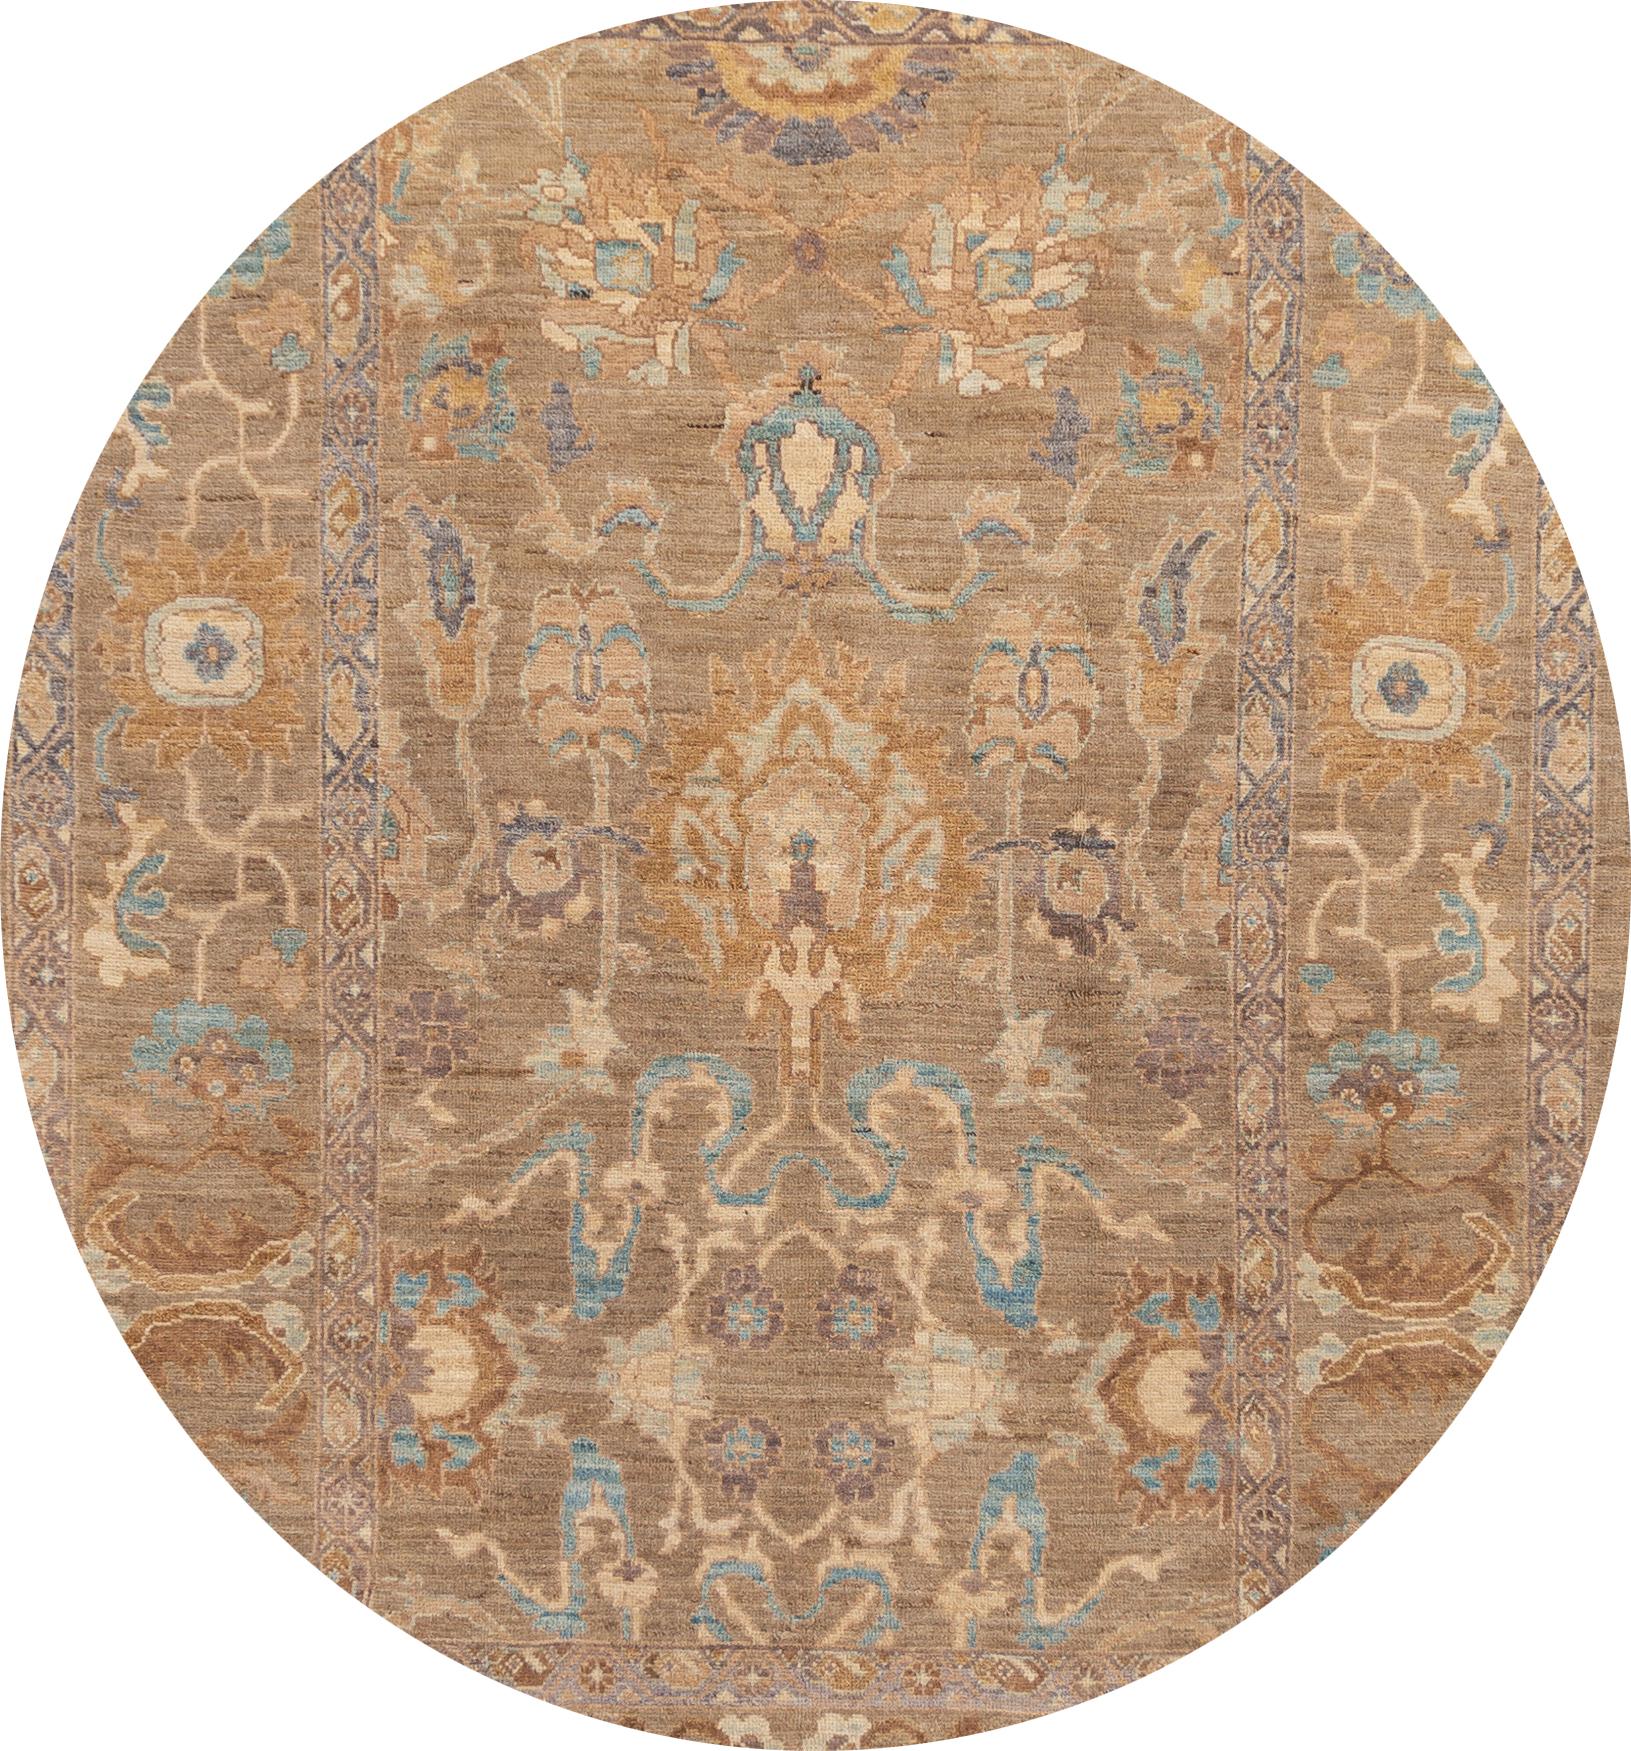 A beautiful 21st century modern Persian Sultanabad rug with an all-over scatter beige motif. This collection is of wool, hand knotted, and made in Iran. 

This rug measures 6'8